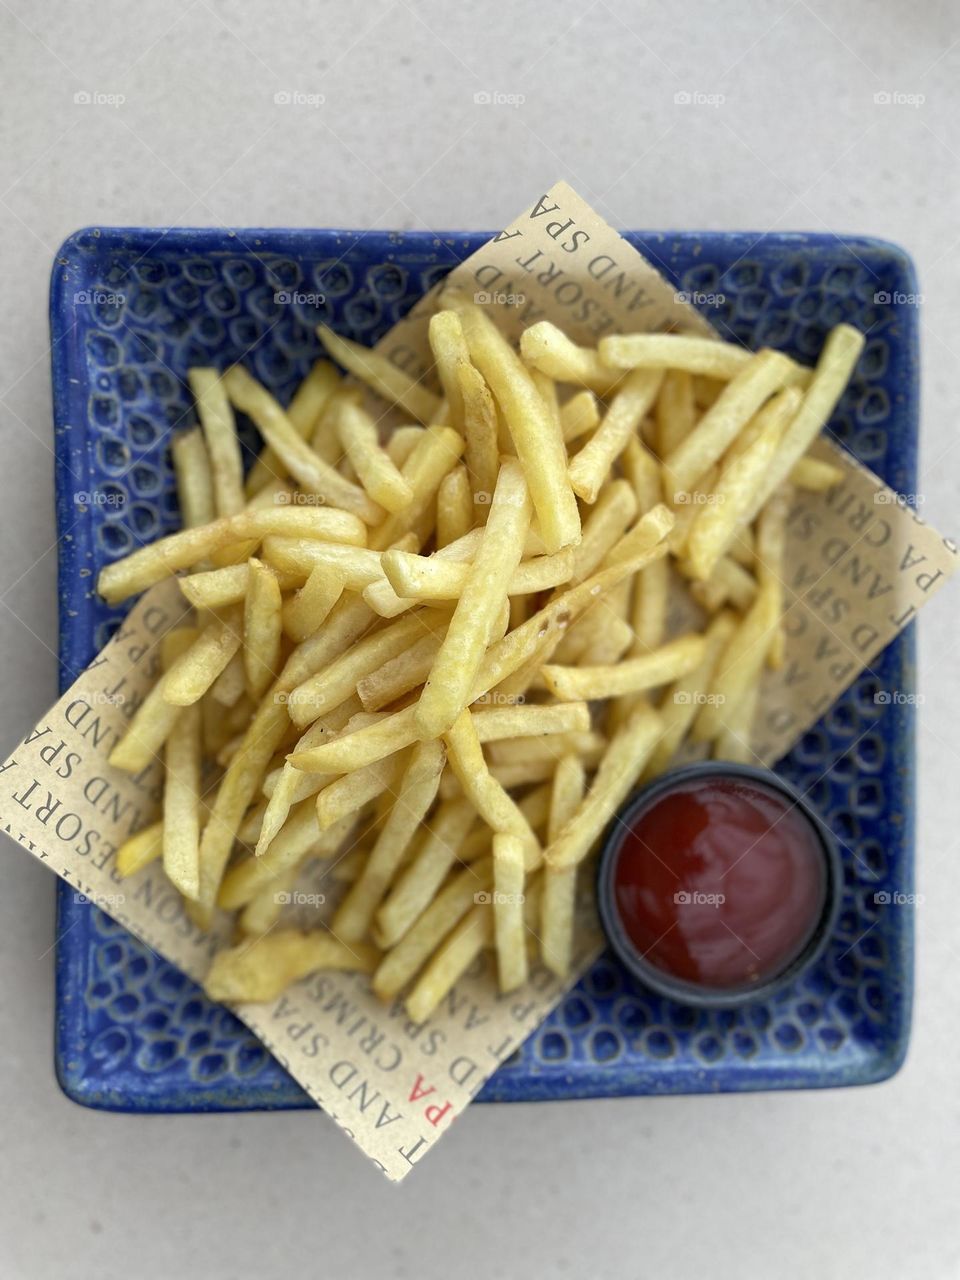 French fries and catsup